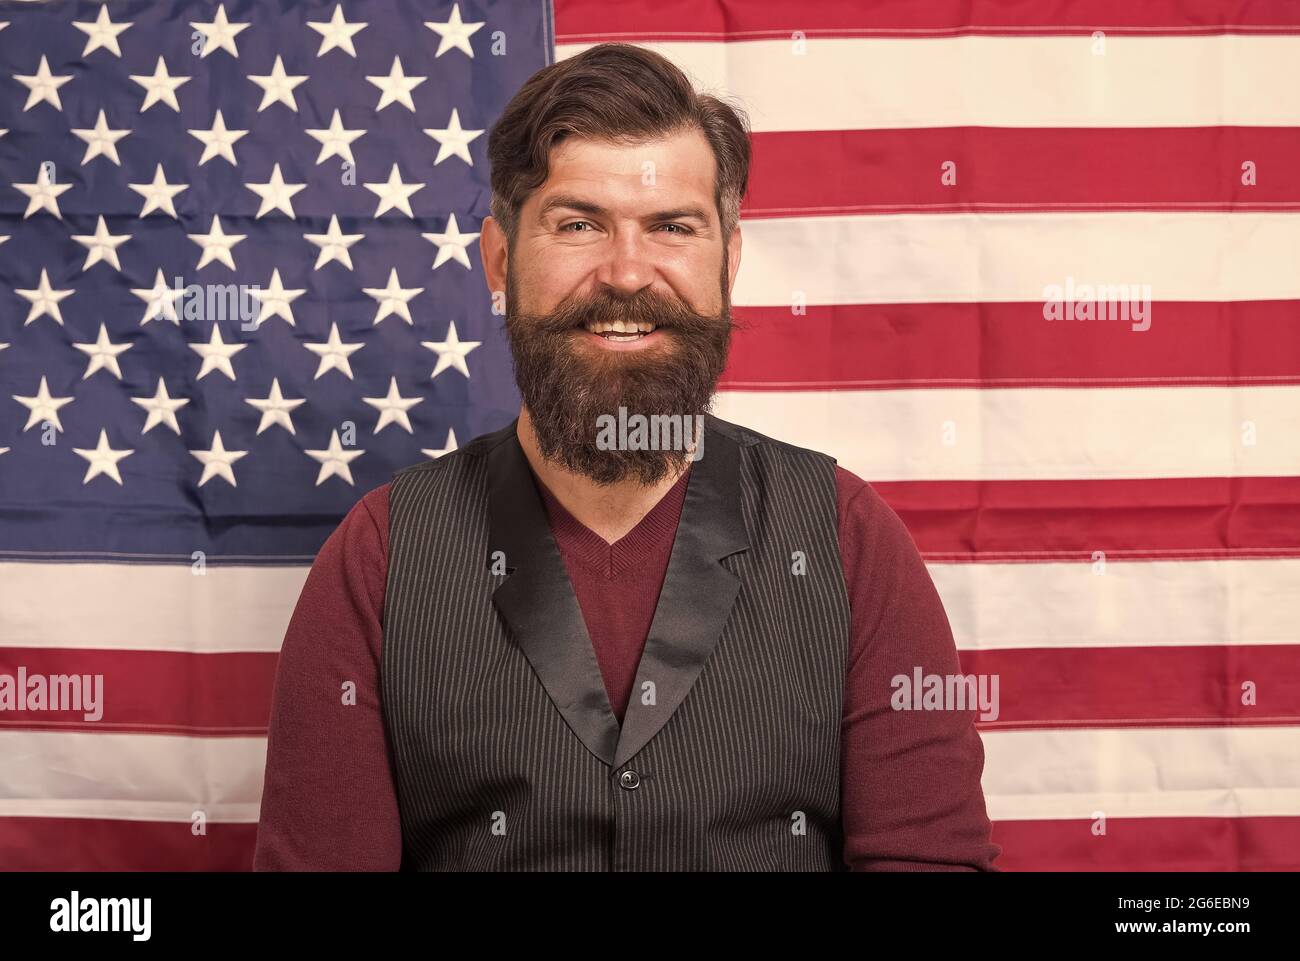 Feel patriotic. usa celebrate 4th of july. english language learning. happy holiday of independence day. follow american traditions. man devoted his Stock Photo